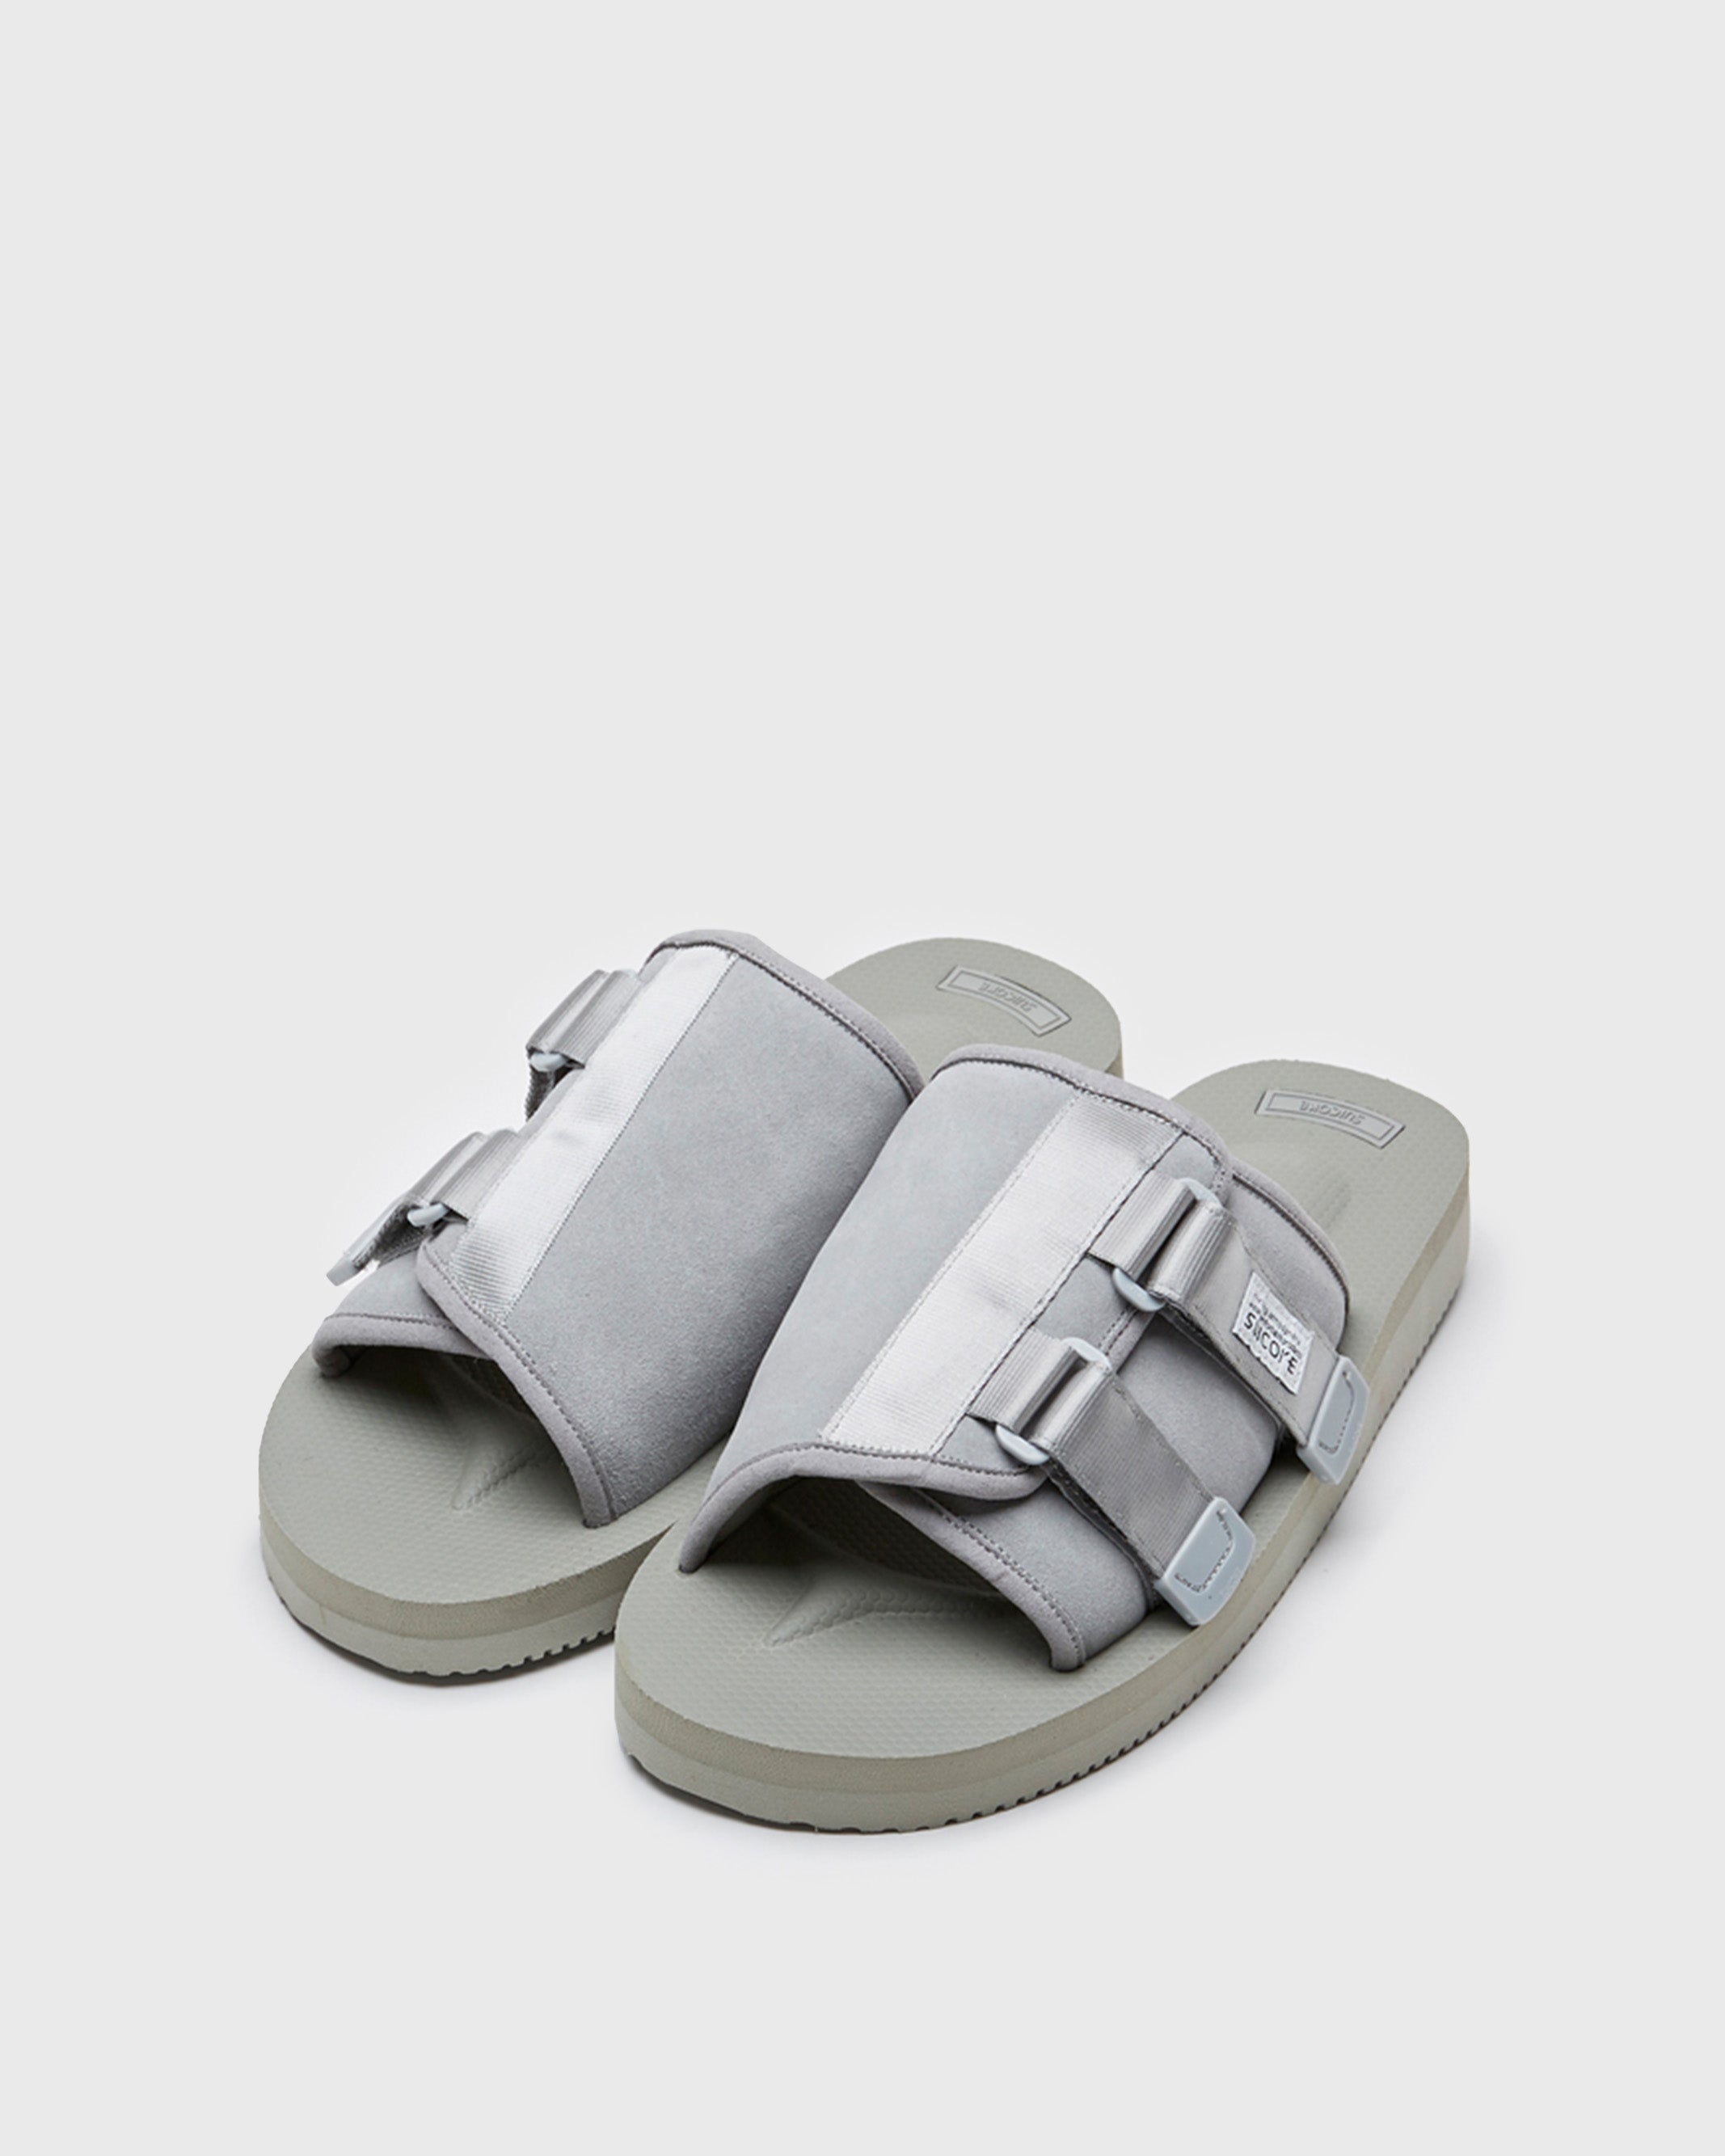 SUICOKE KAW-VS in Gray OG-081VS | Shop from eightywingold an official brand partner for SUICOKE Canada and US.